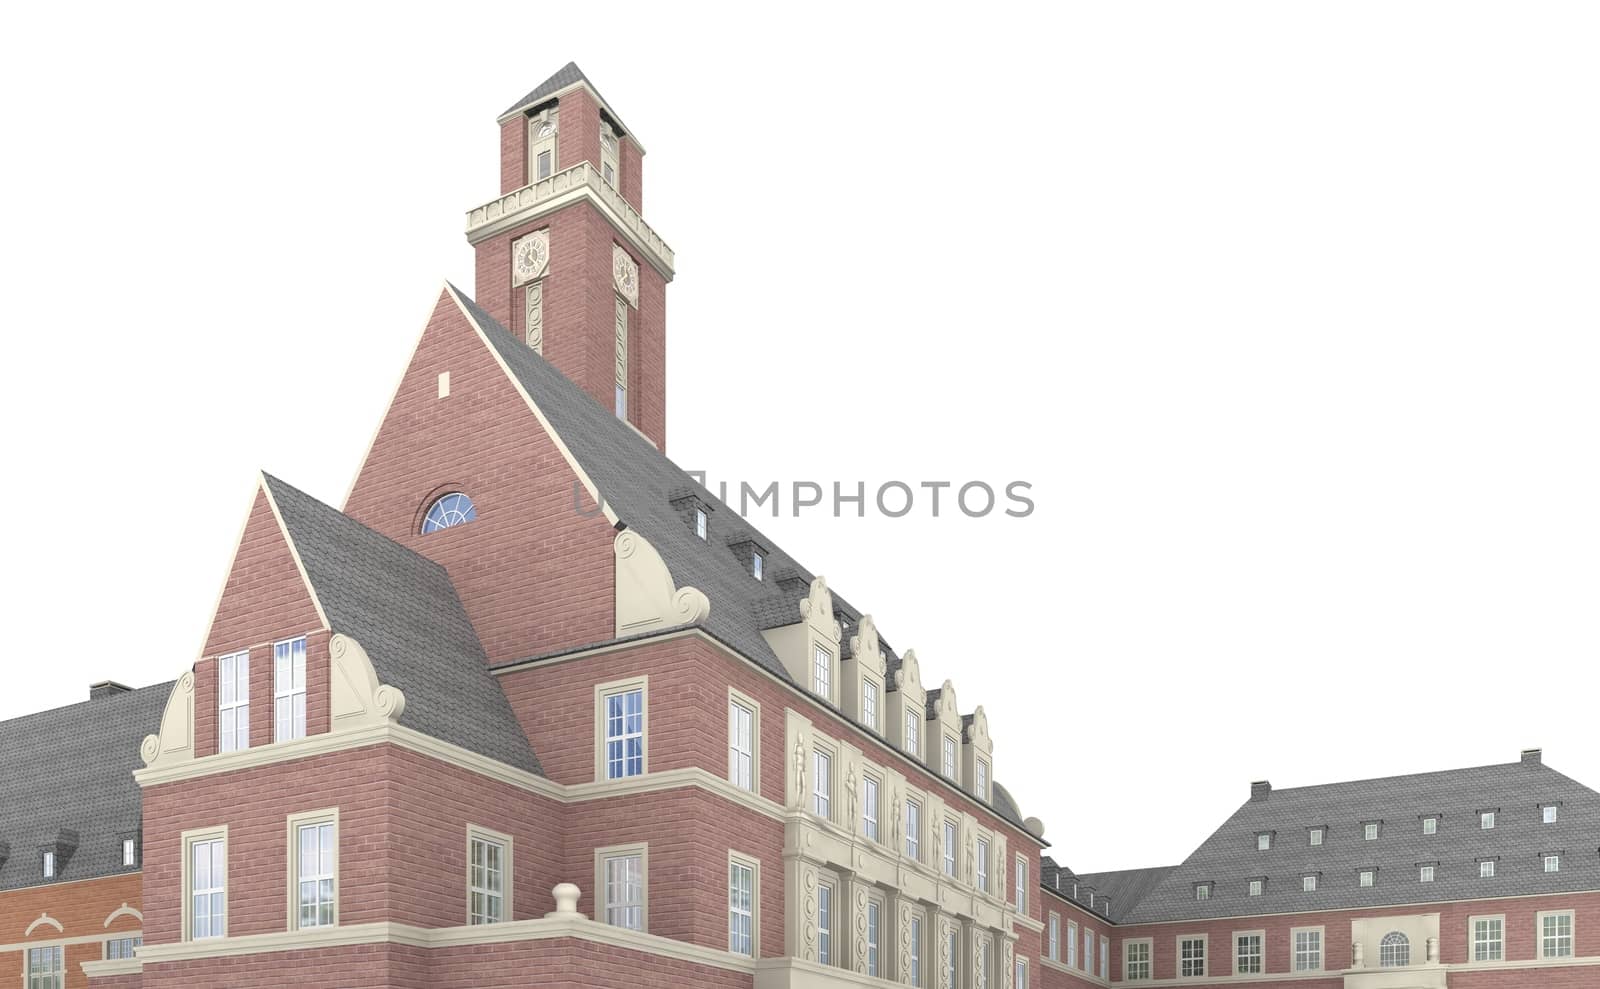 The Bottrop town hall from 1918 is considered as one of the finest in the Ruhr.